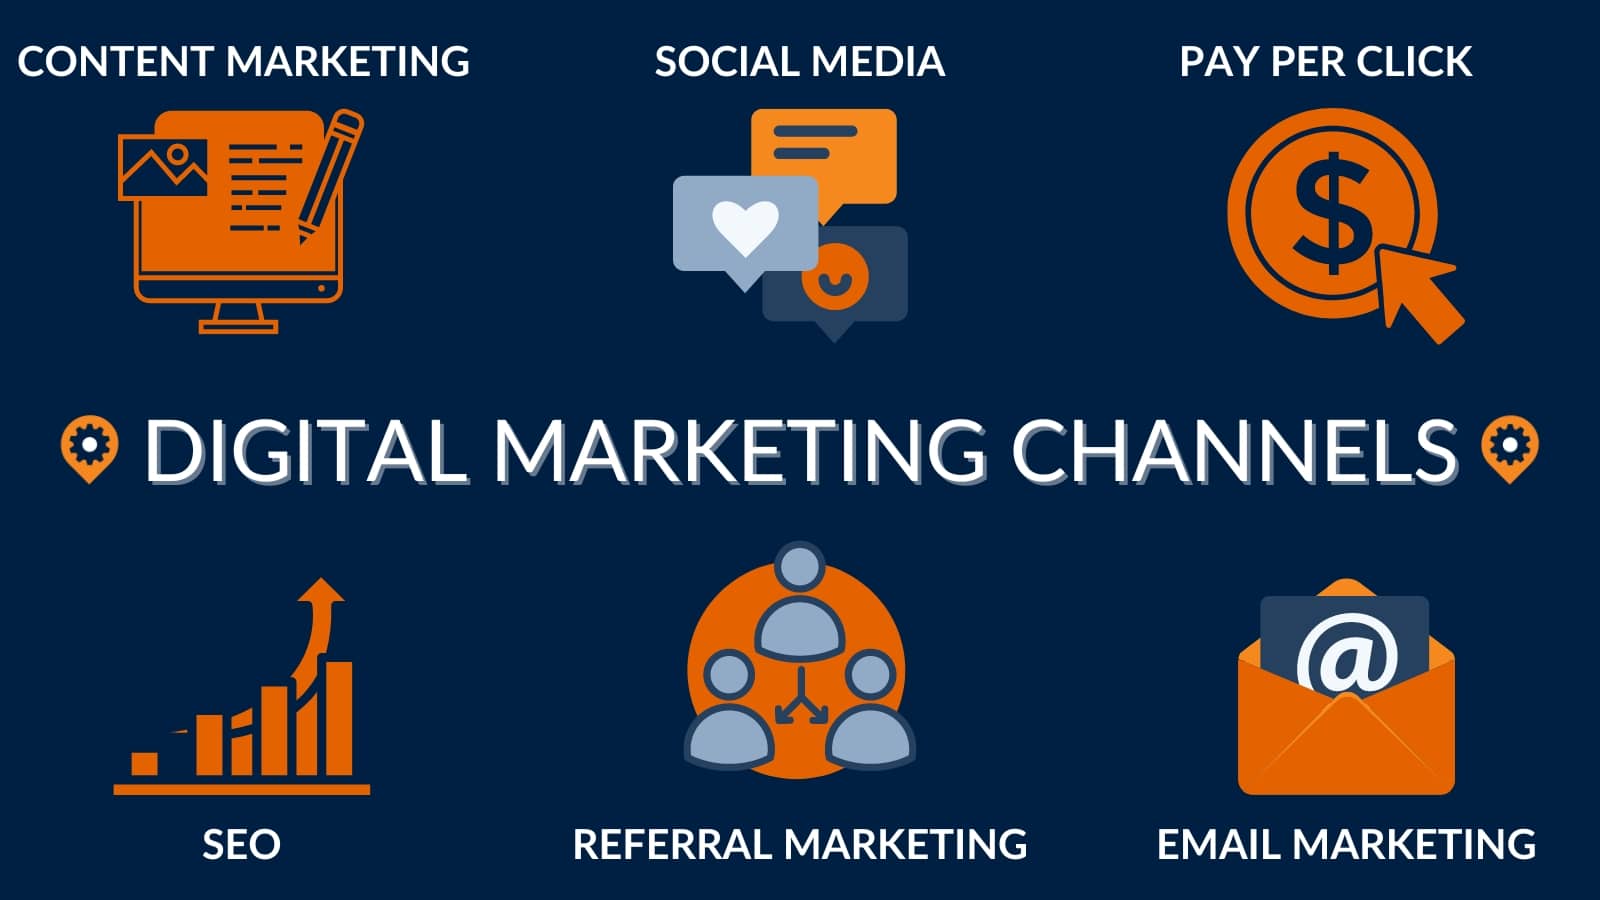 Digital marketing channels include content marketing, social media, PPC, SEO, referral marketing, and email marketing. 